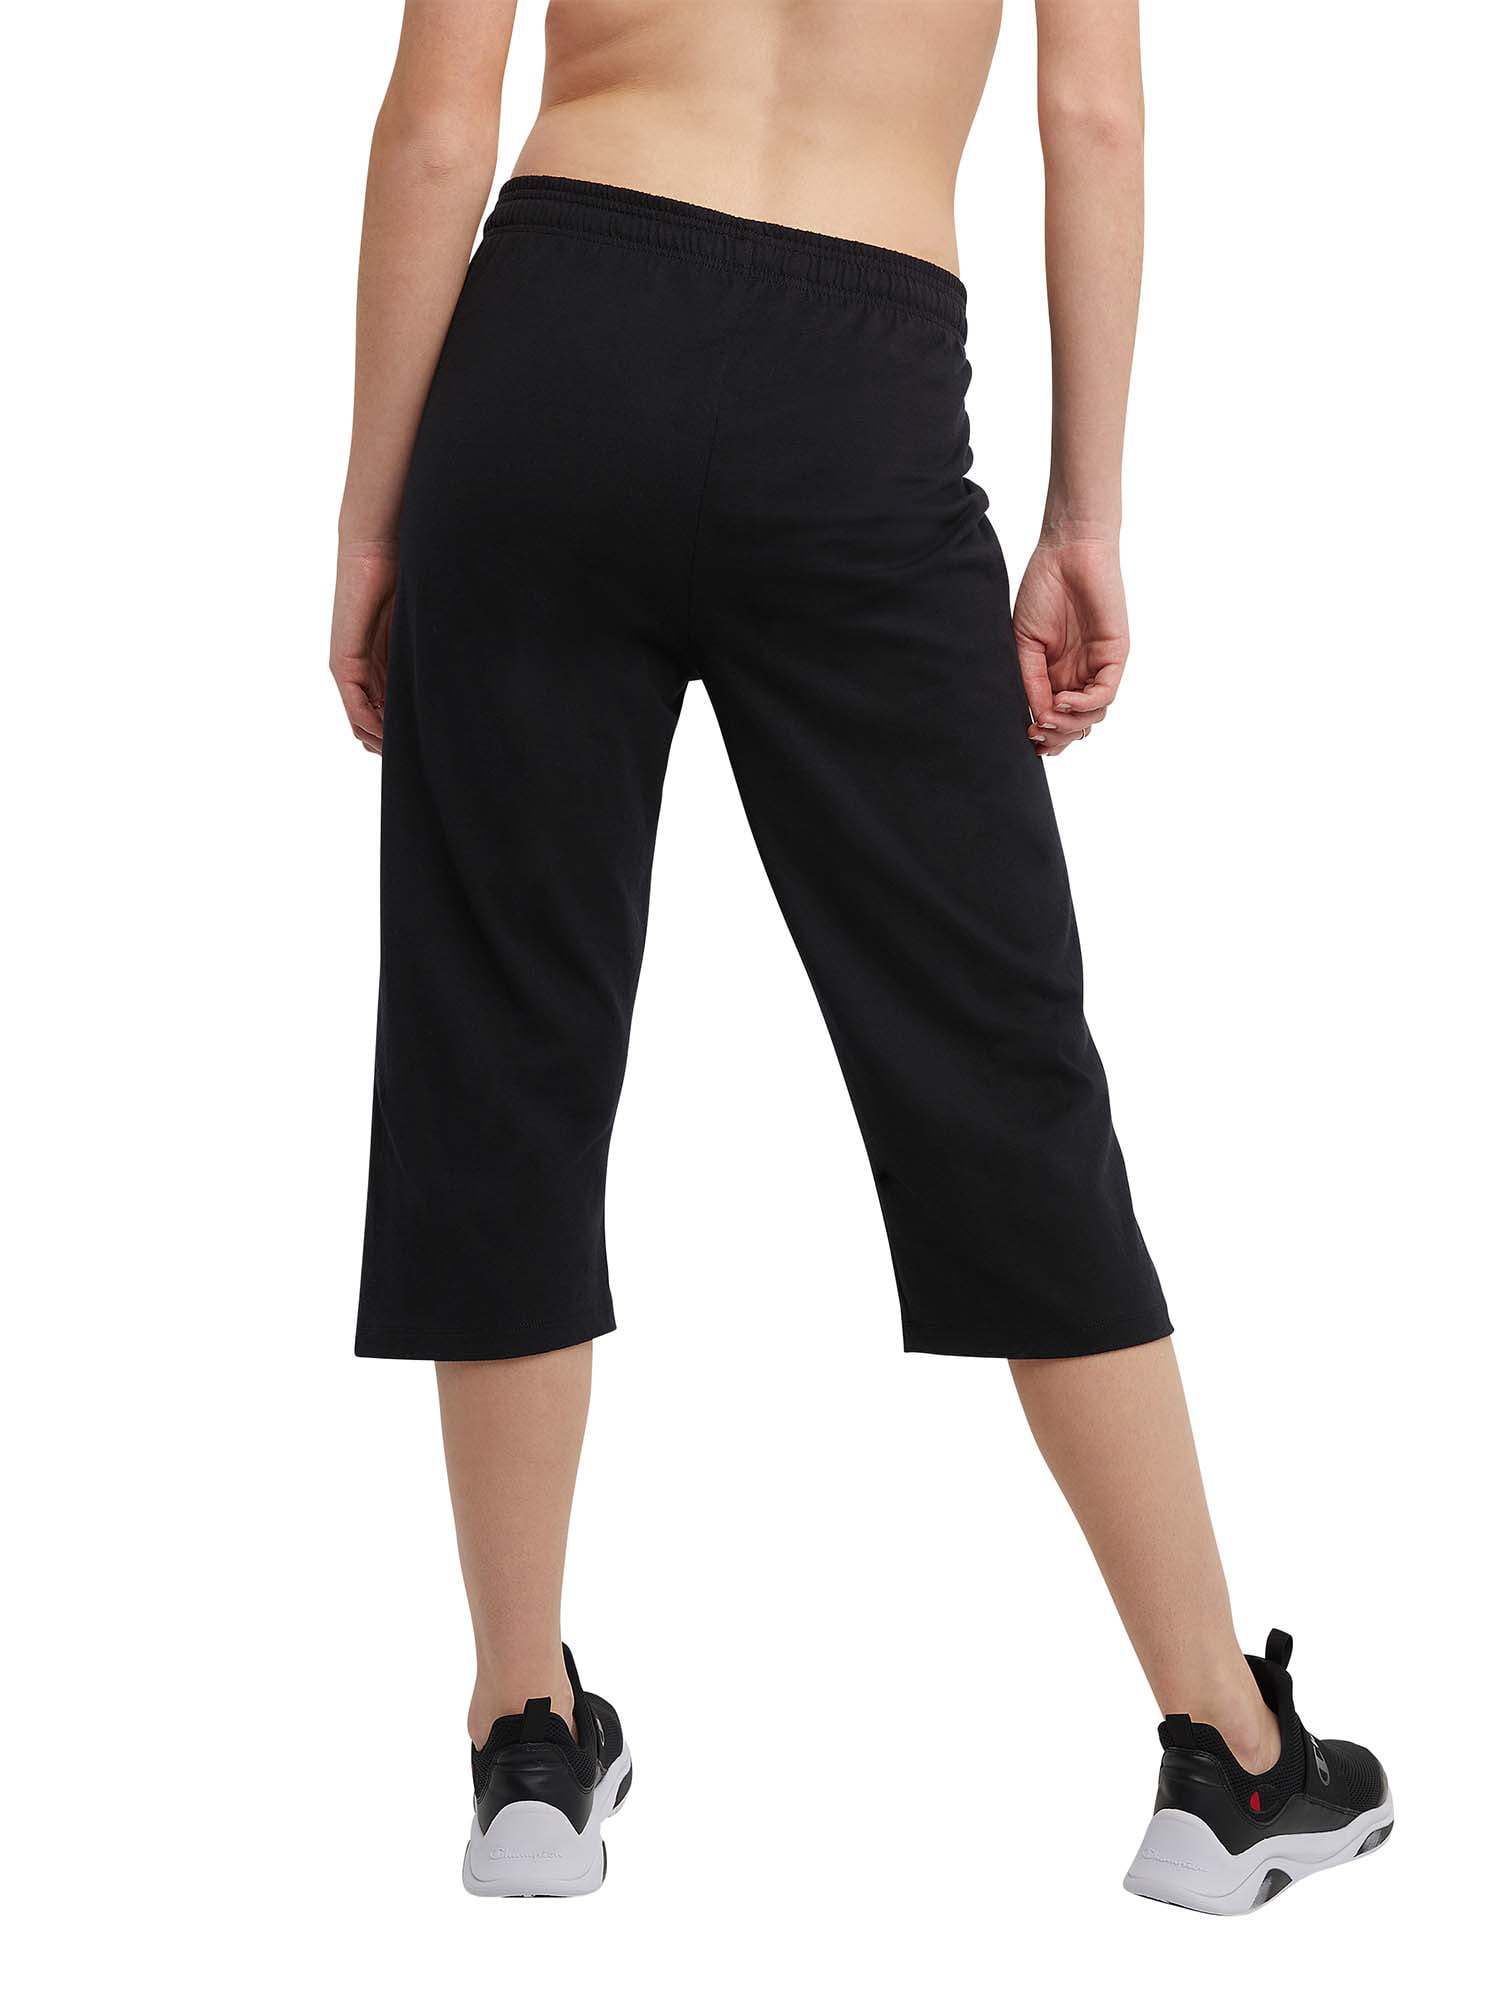 Champion Women's French Terry Capris 